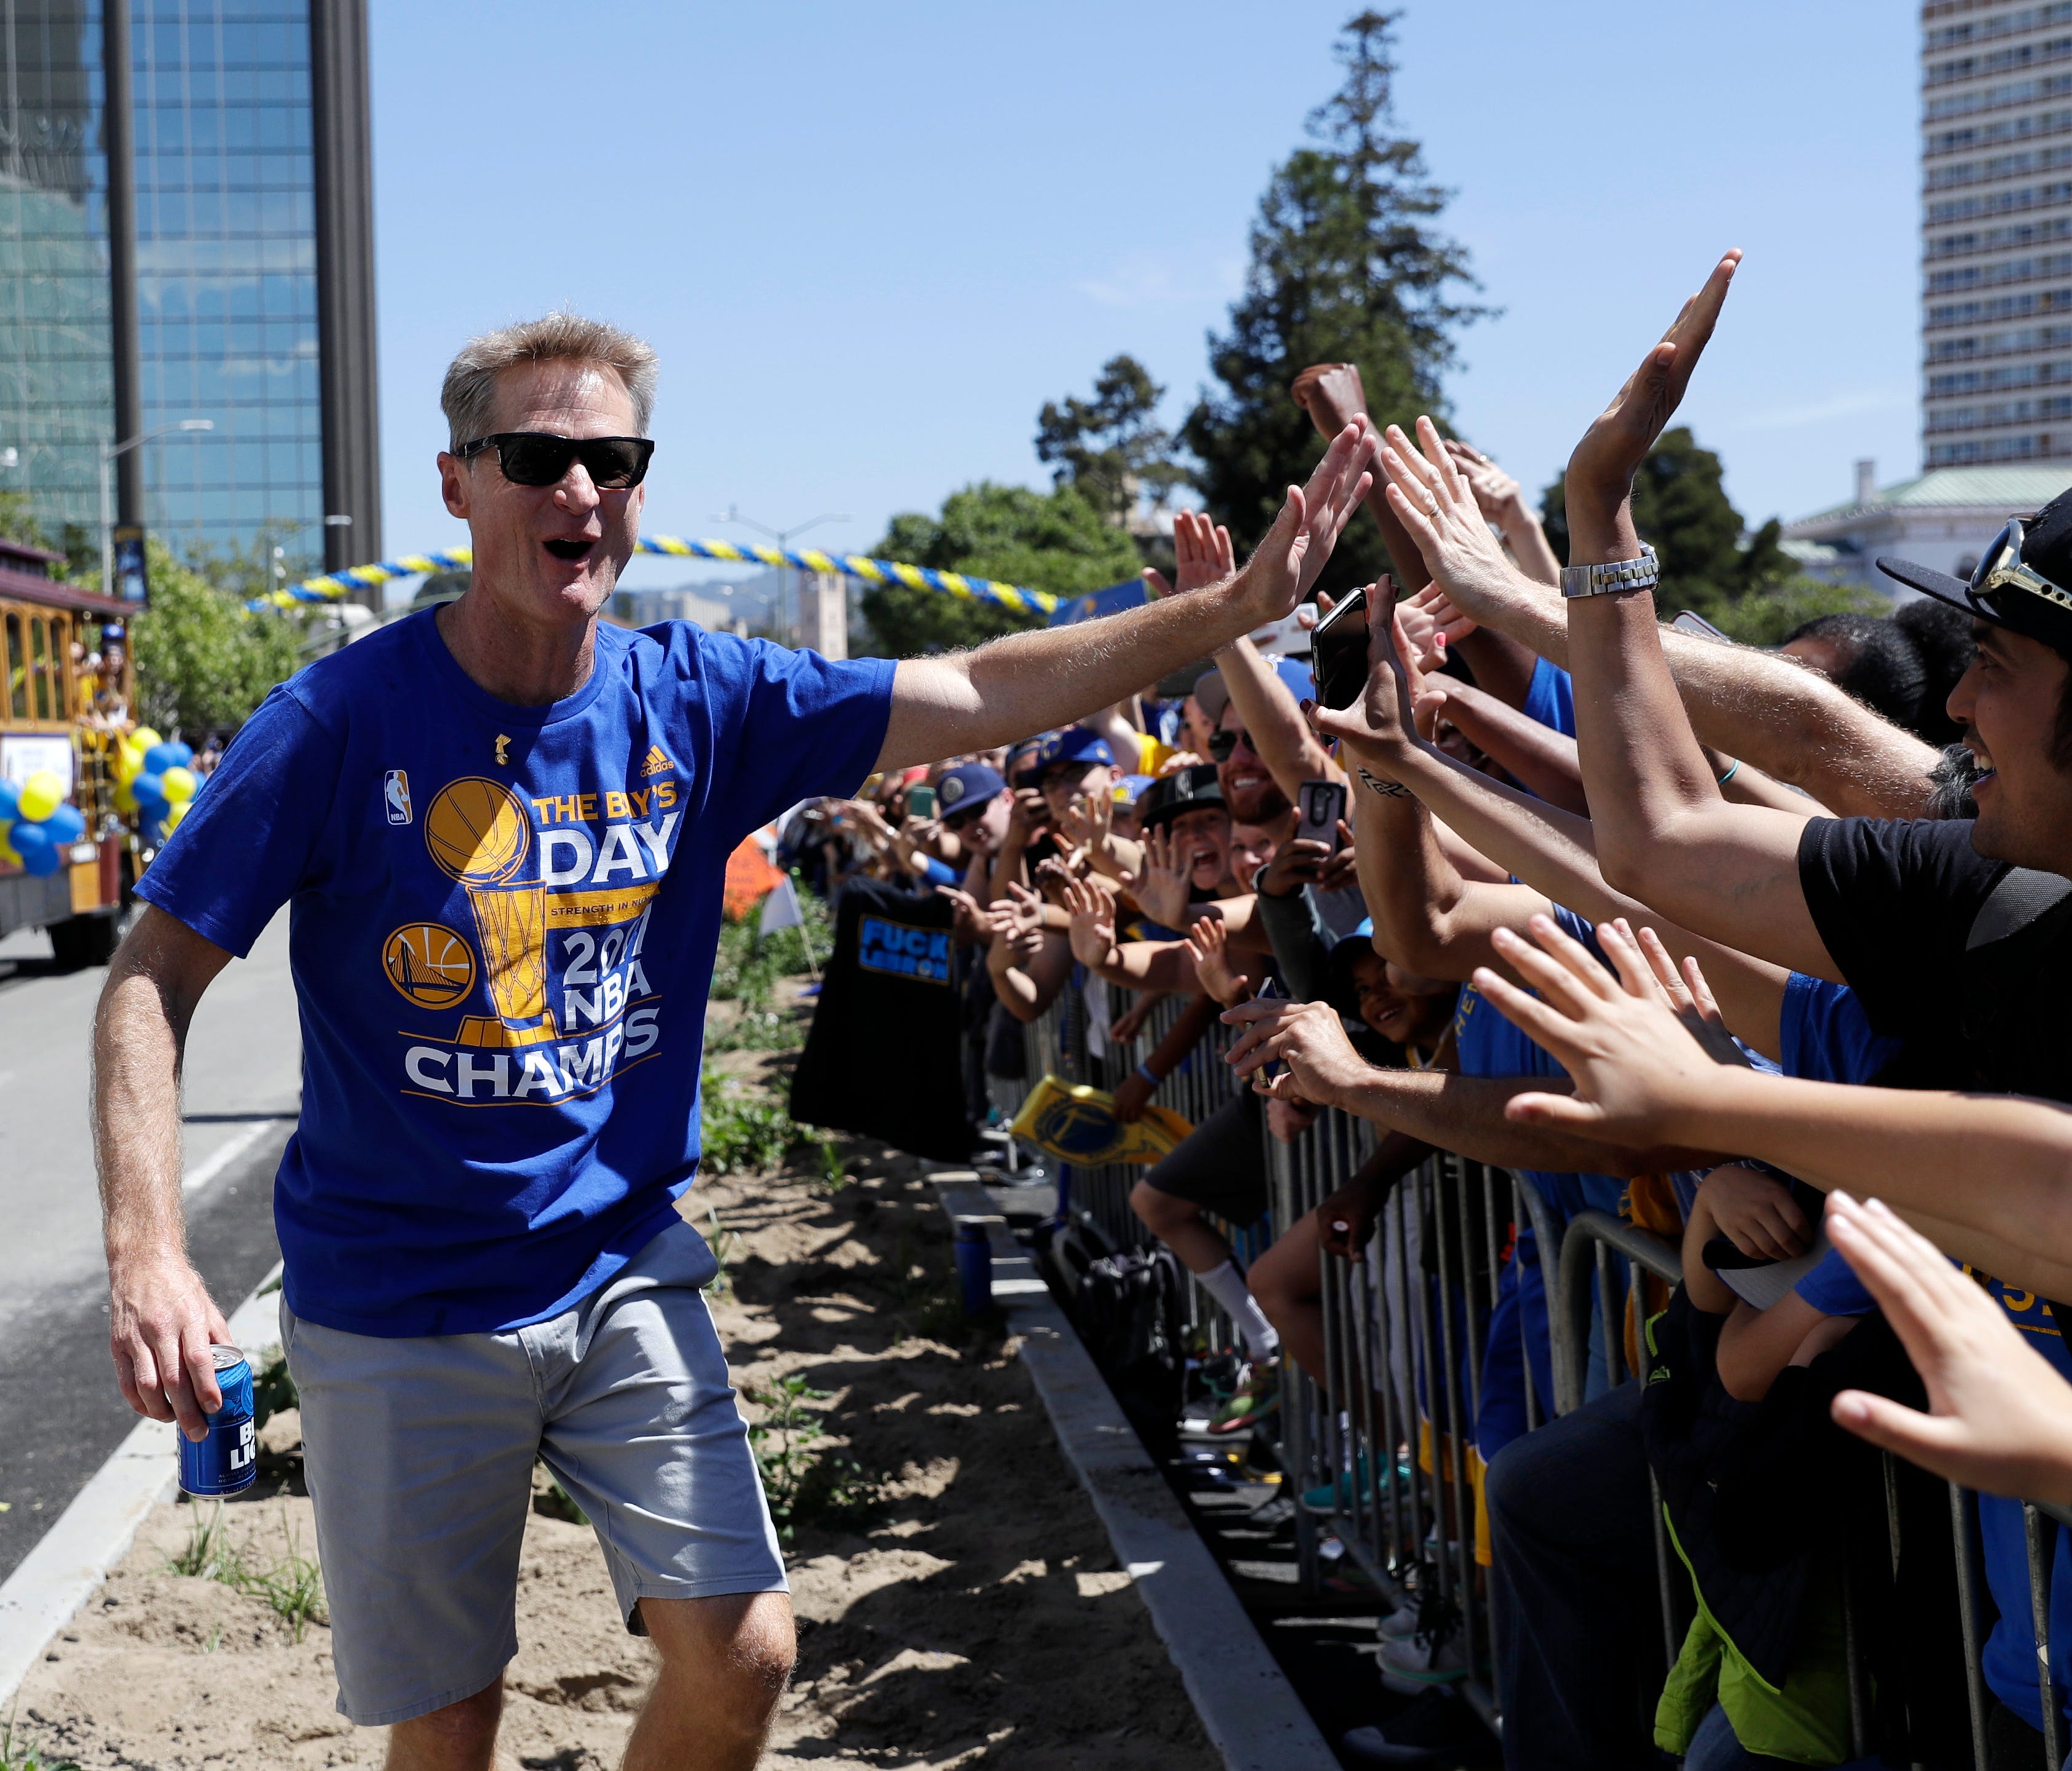 Warriors coach Steve Kerr said it would be up to his players to decide whether to accept a White House visit invitation.